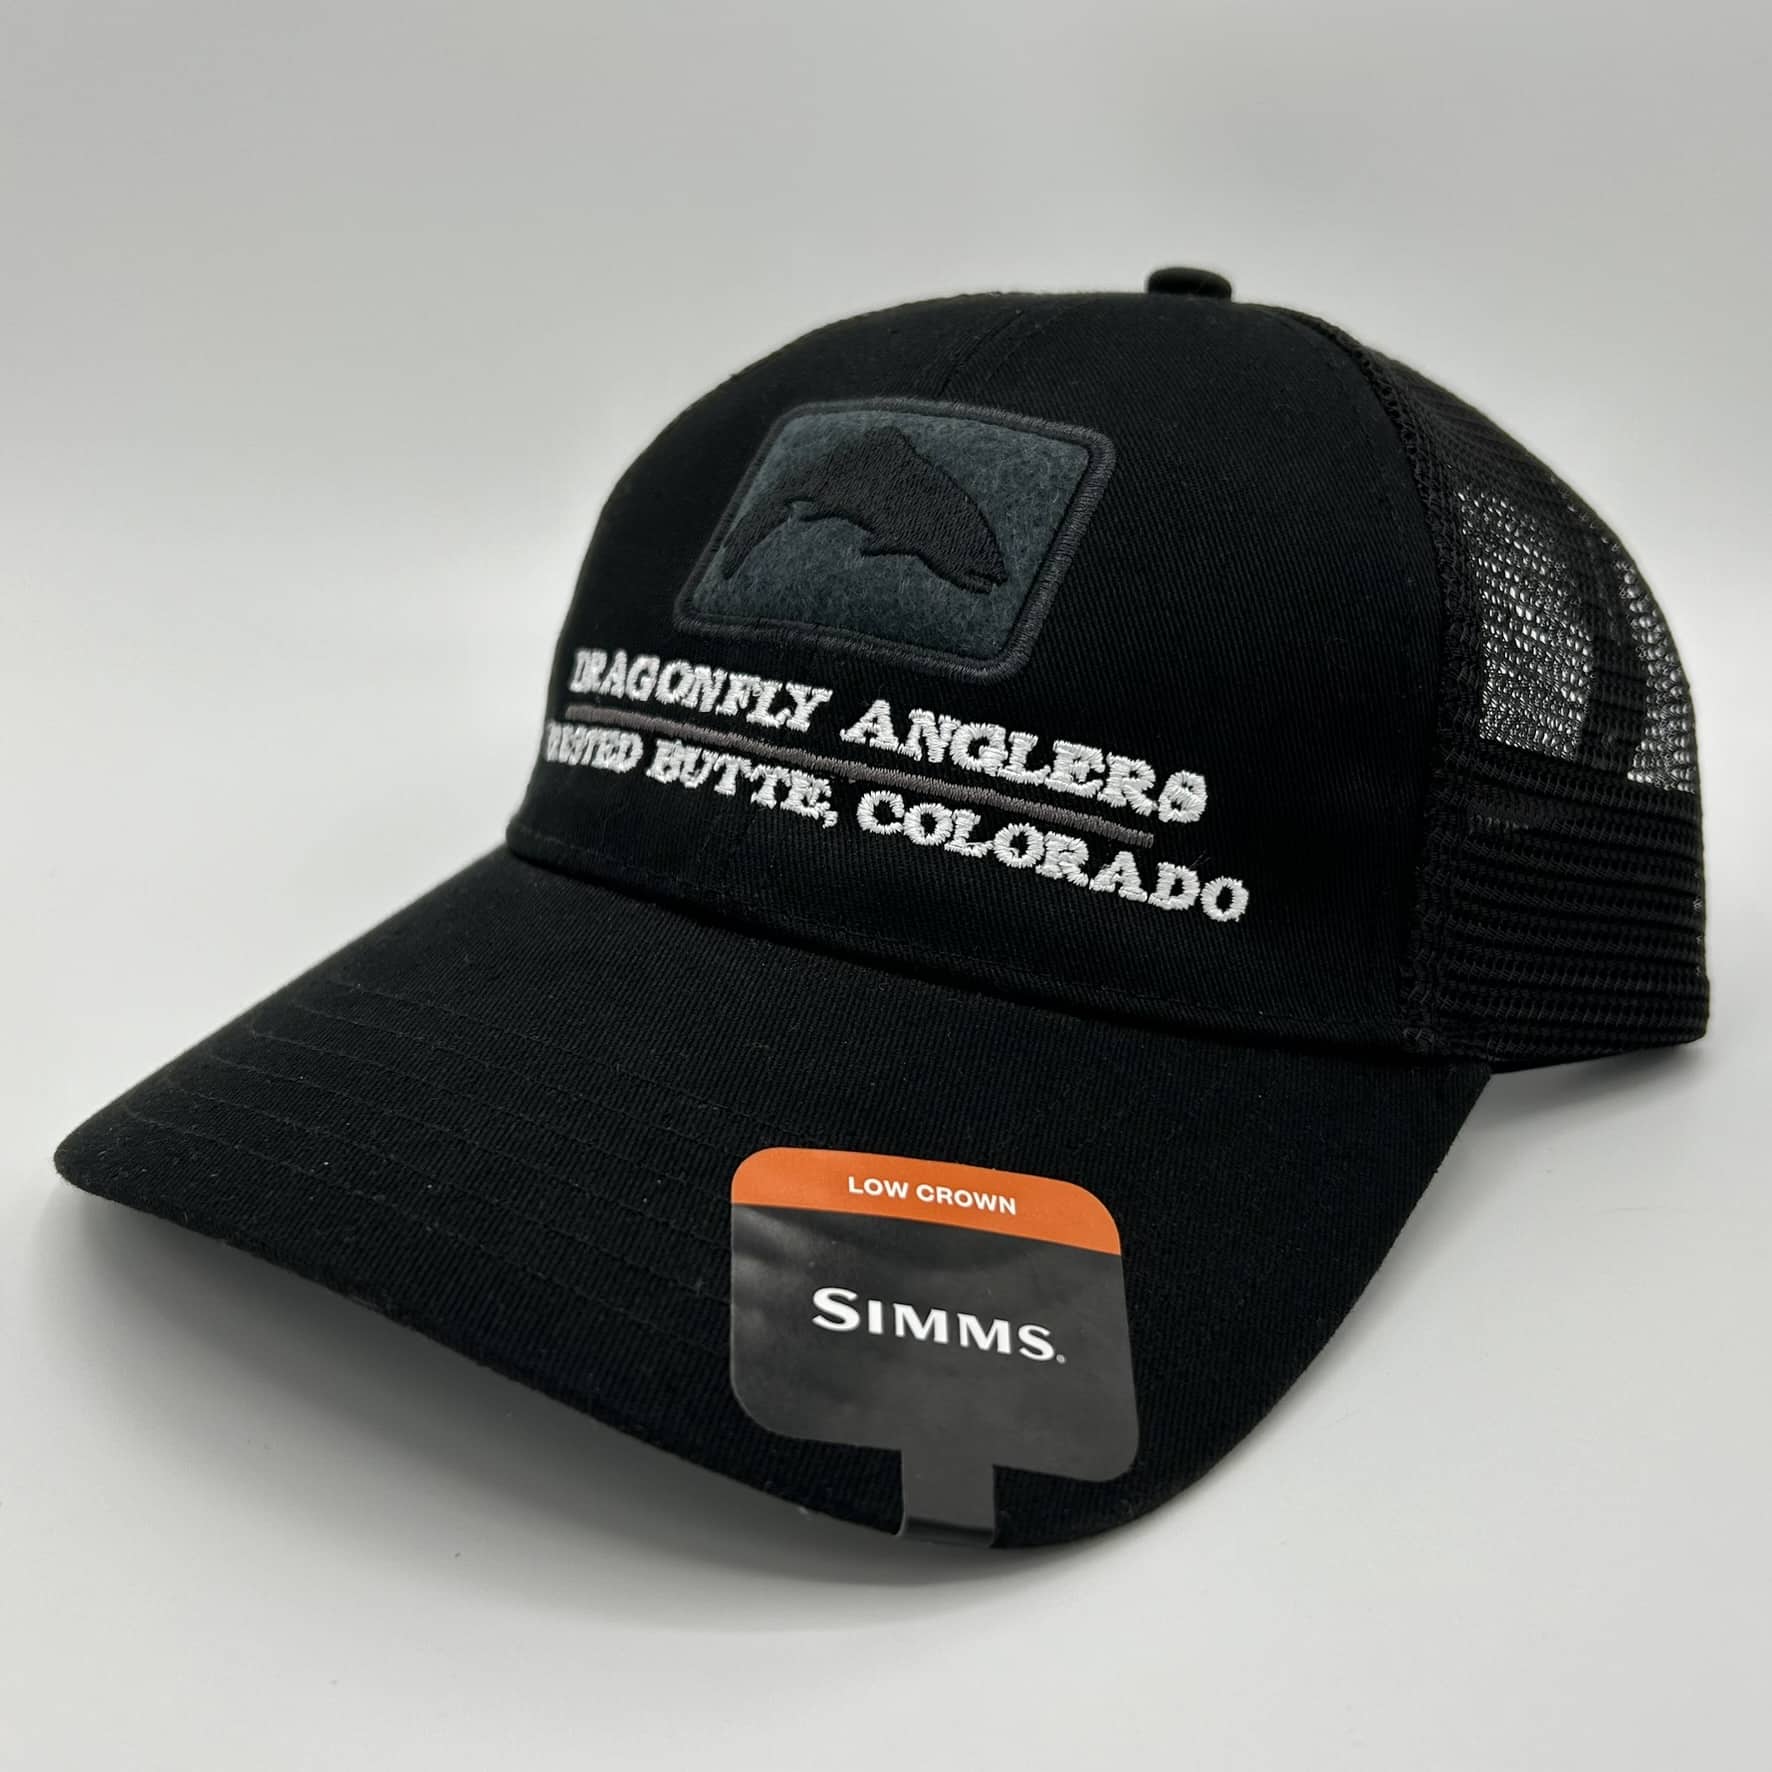 Dragonfly Anglers Simms Trucker Hat - Dragonfly Anglers